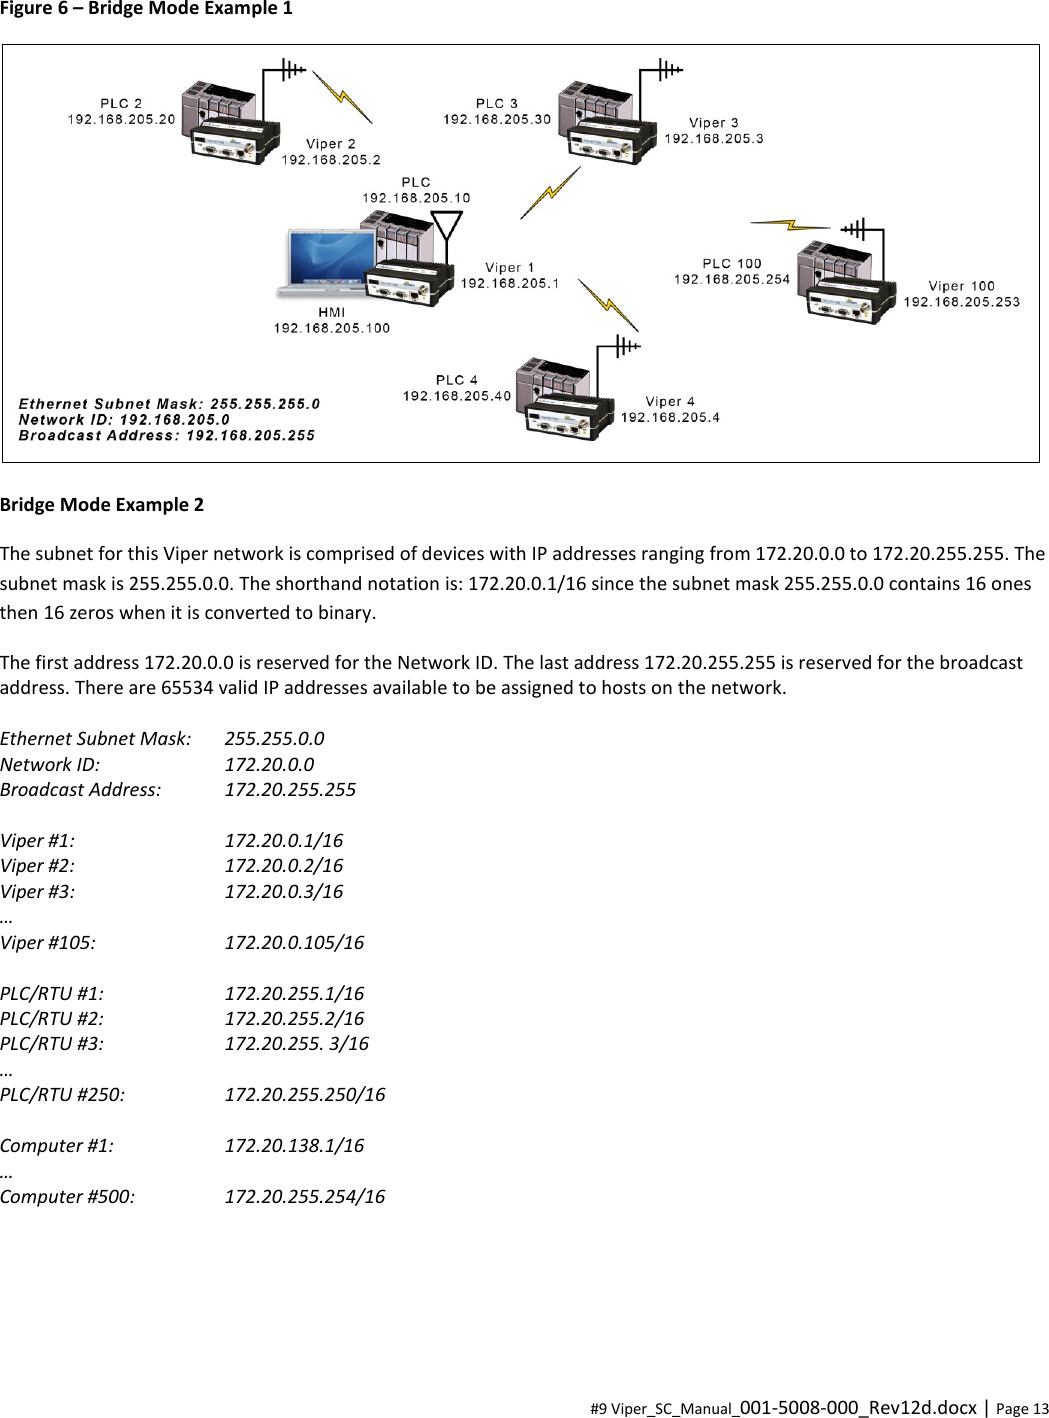  #9 Viper_SC_Manual_001-5008-000_Rev12d.docx | Page 13 Figure 6 – Bridge Mode Example 1  Bridge Mode Example 2 The subnet for this Viper network is comprised of devices with IP addresses ranging from 172.20.0.0 to 172.20.255.255. The subnet mask is 255.255.0.0. The shorthand notation is: 172.20.0.1/16 since the subnet mask 255.255.0.0 contains 16 ones then 16 zeros when it is converted to binary. The first address 172.20.0.0 is reserved for the Network ID. The last address 172.20.255.255 is reserved for the broadcast address. There are 65534 valid IP addresses available to be assigned to hosts on the network.  Ethernet Subnet Mask:   255.255.0.0 Network ID:     172.20.0.0 Broadcast Address:   172.20.255.255  Viper #1:     172.20.0.1/16 Viper #2:     172.20.0.2/16 Viper #3:     172.20.0.3/16 … Viper #105:     172.20.0.105/16  PLC/RTU #1:    172.20.255.1/16 PLC/RTU #2:    172.20.255.2/16 PLC/RTU #3:    172.20.255. 3/16 …  PLC/RTU #250:    172.20.255.250/16  Computer #1:    172.20.138.1/16 …  Computer #500:     172.20.255.254/16     